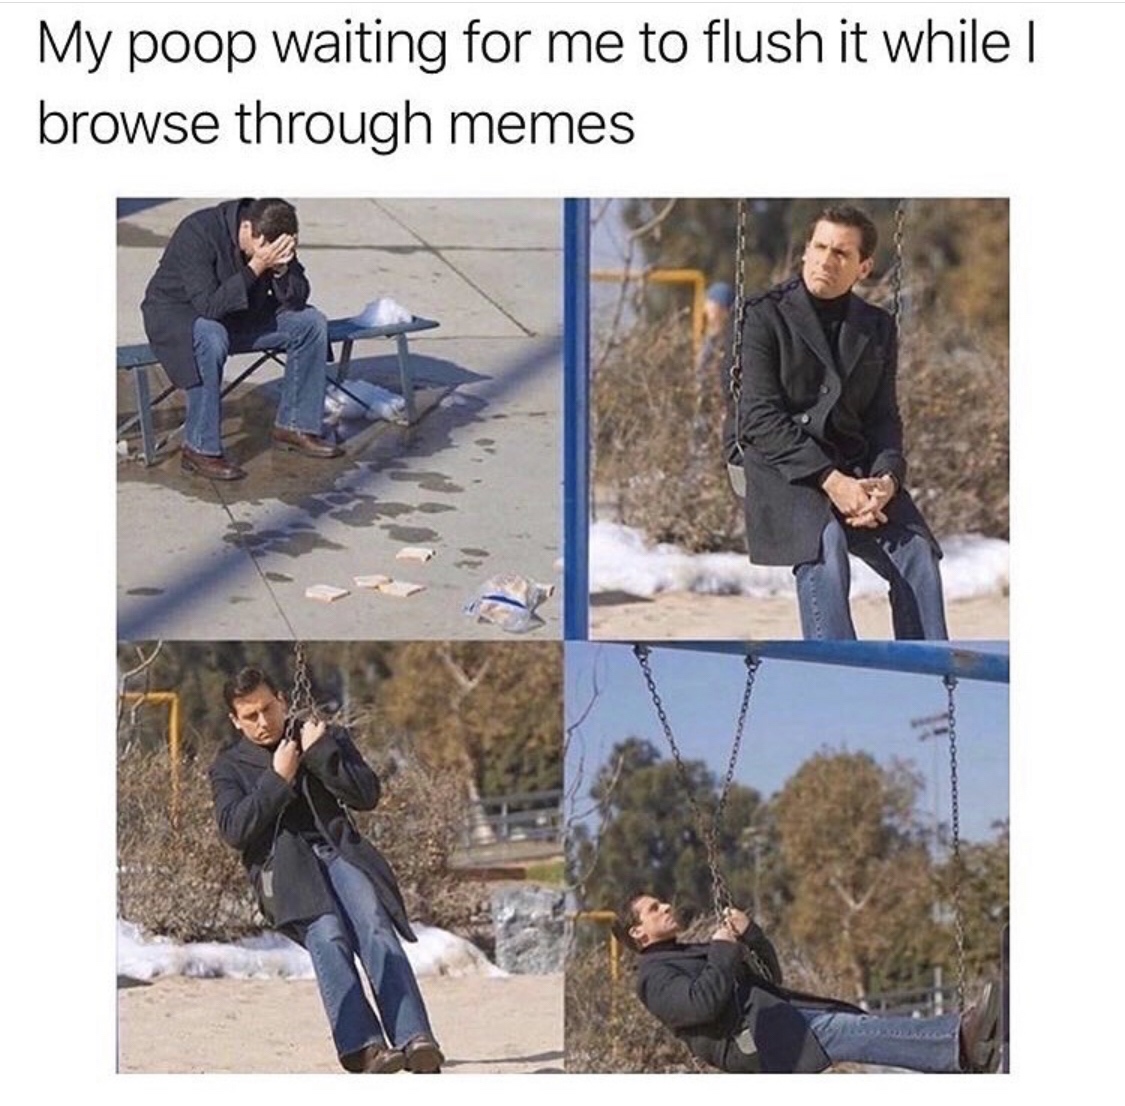 other viruses meme - My poop waiting for me to flush it while | browse through memes